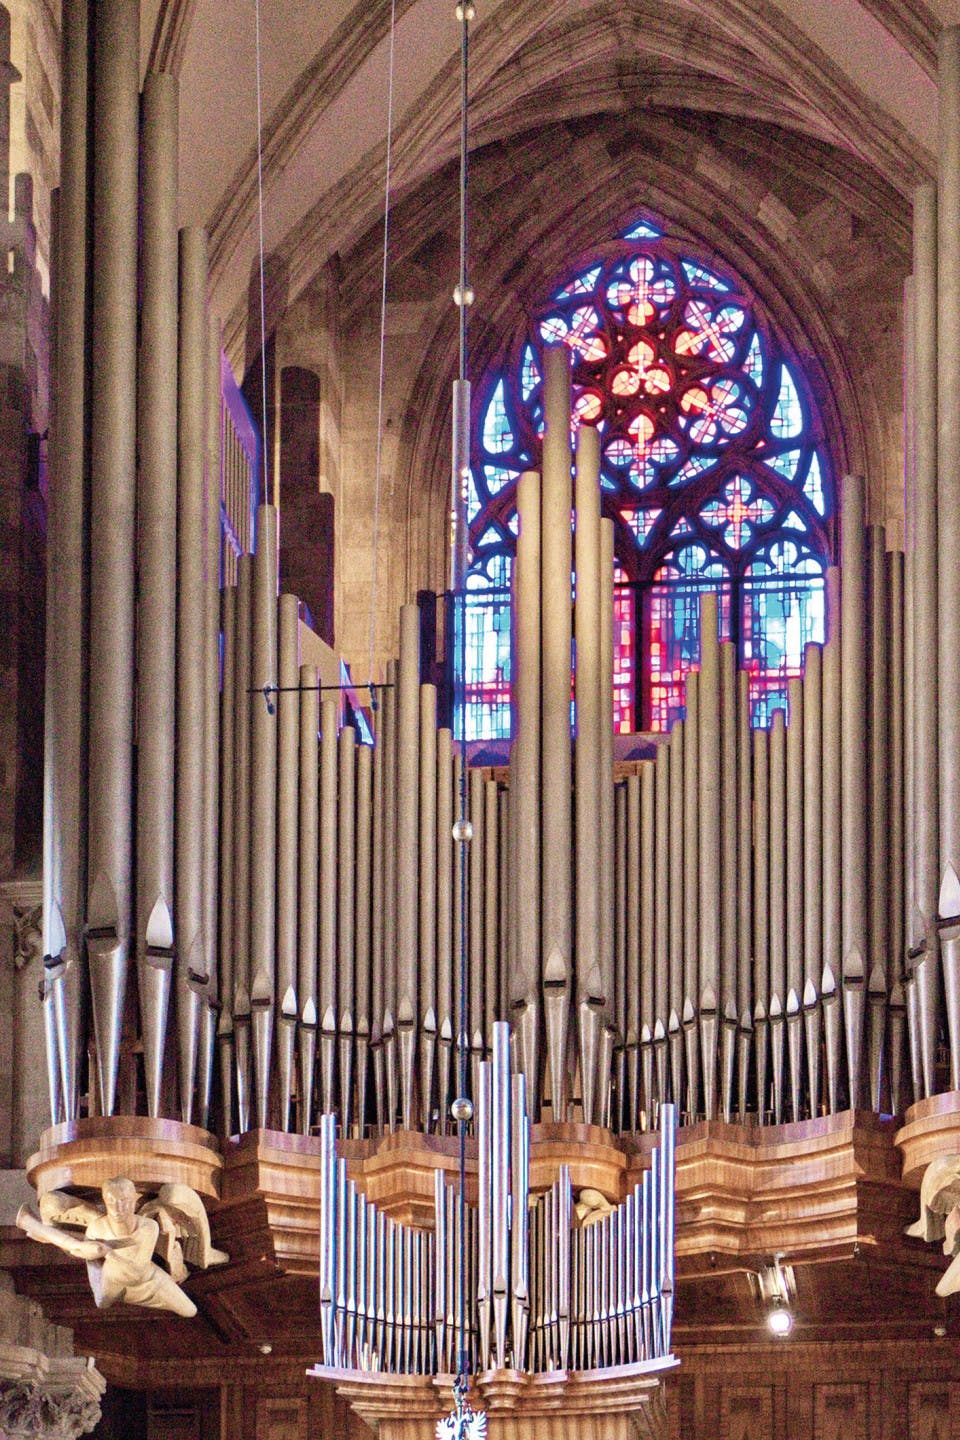 Cathedral organs